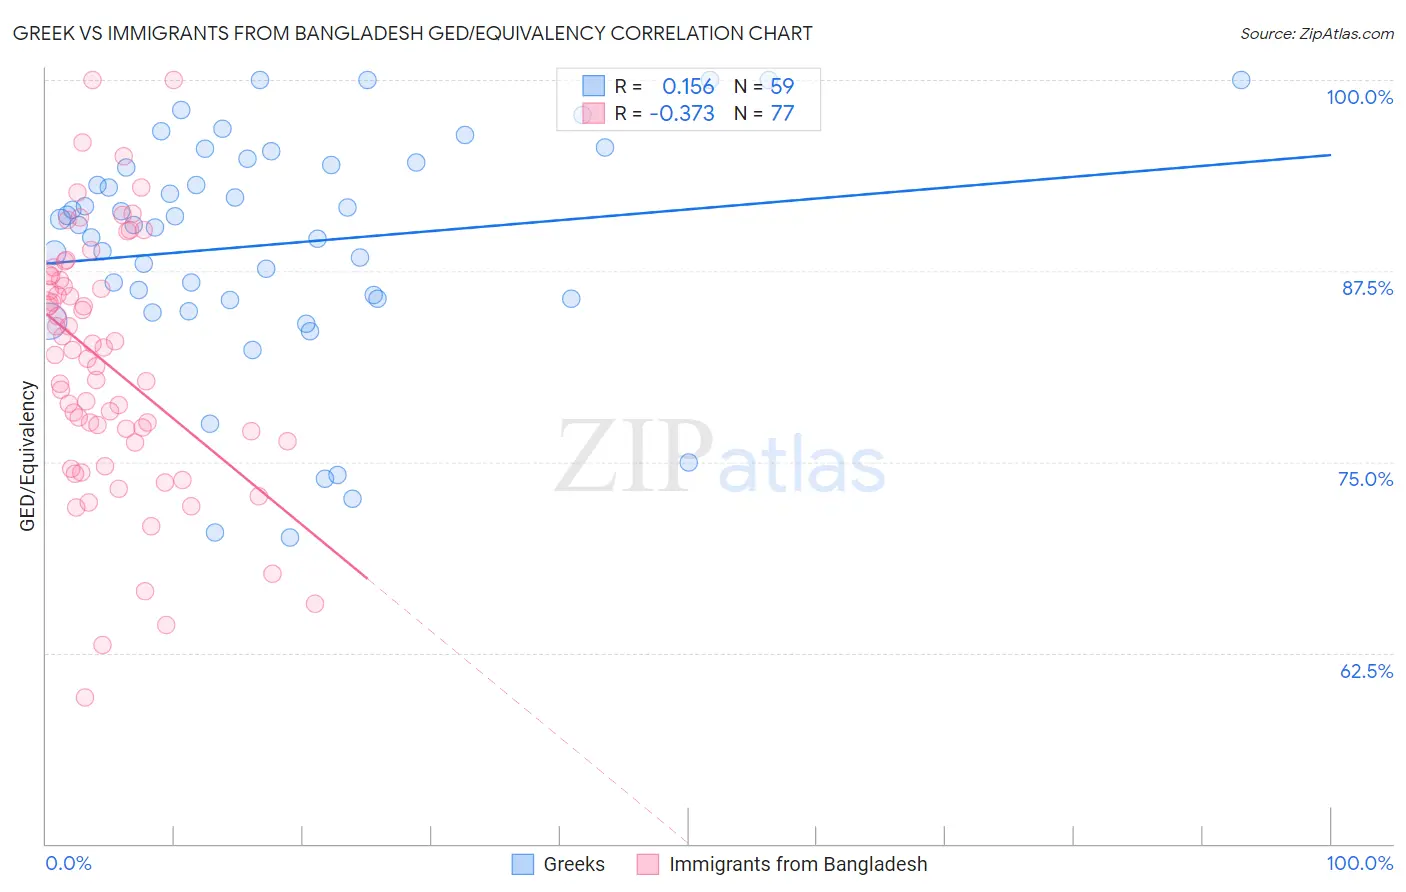 Greek vs Immigrants from Bangladesh GED/Equivalency